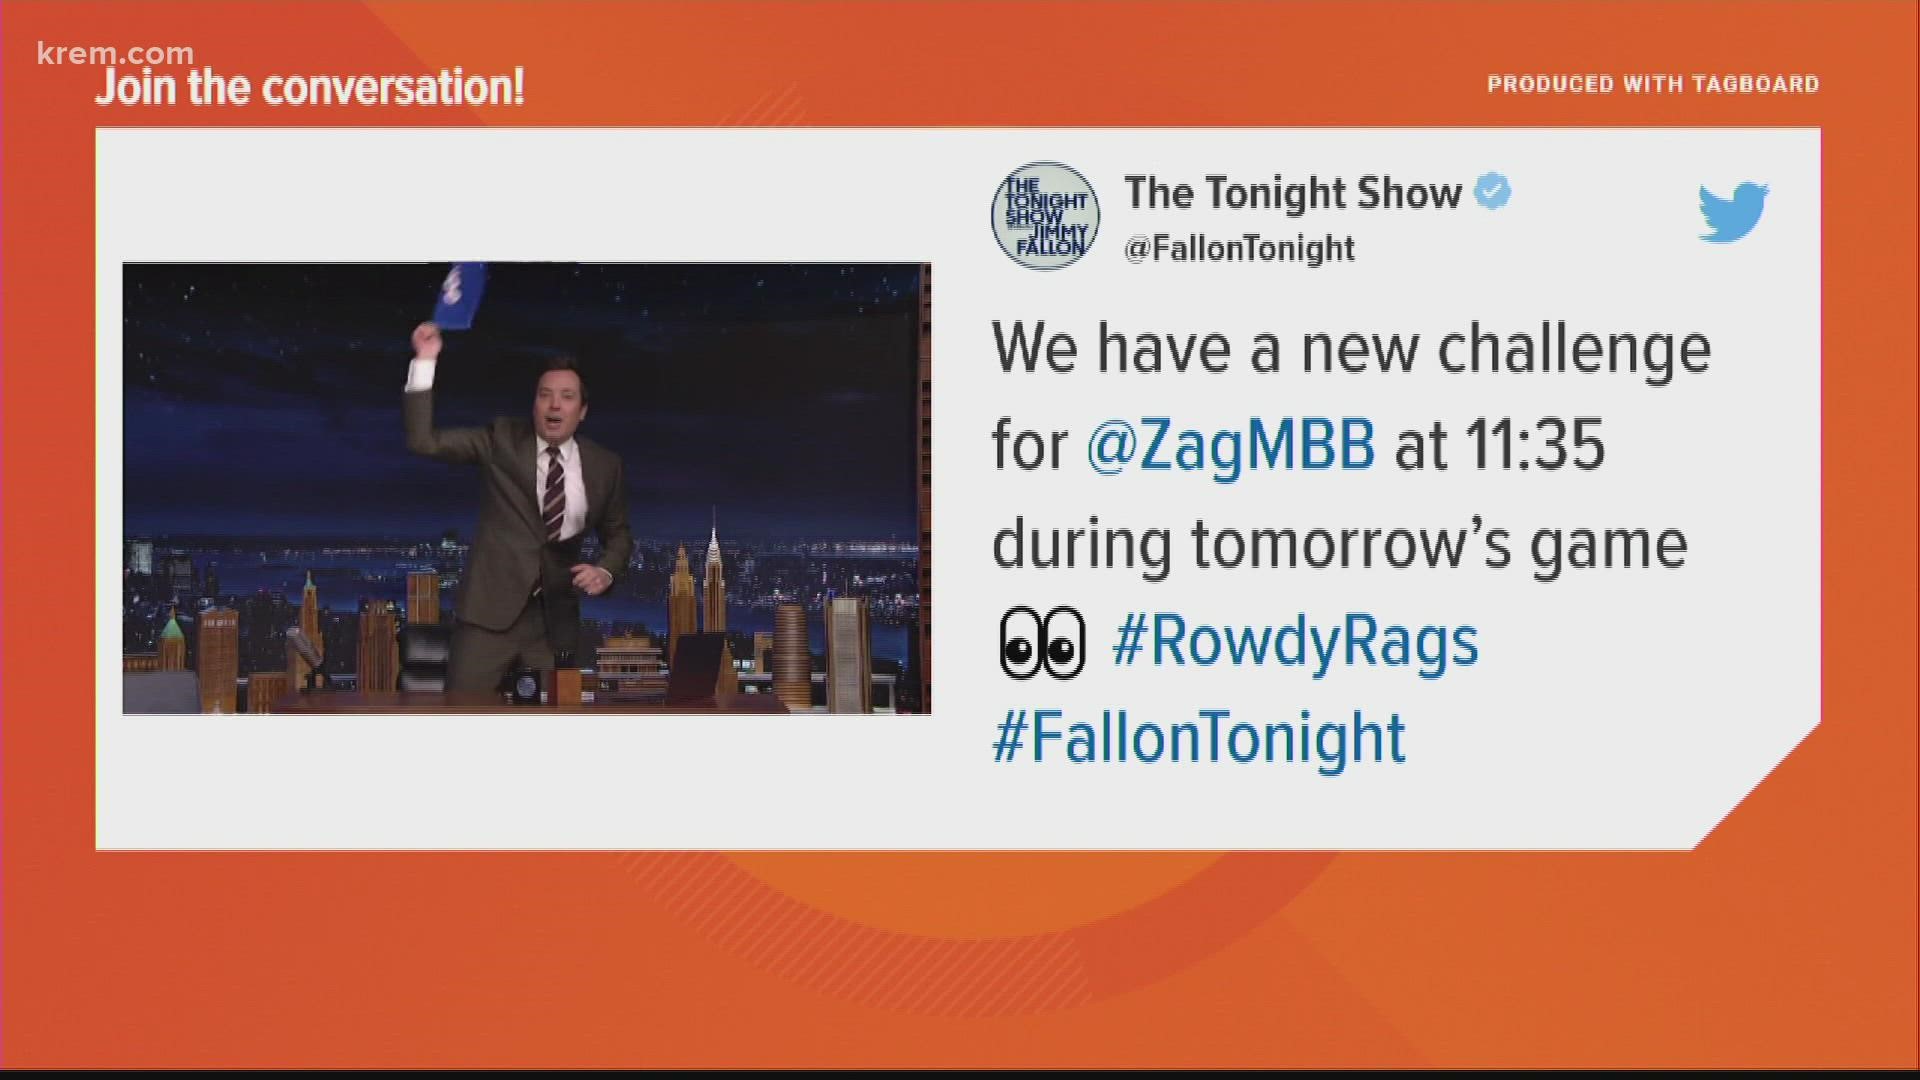 Jimmy Fallon has another challenge for Zag fans as the team heads into the Sweet 16.